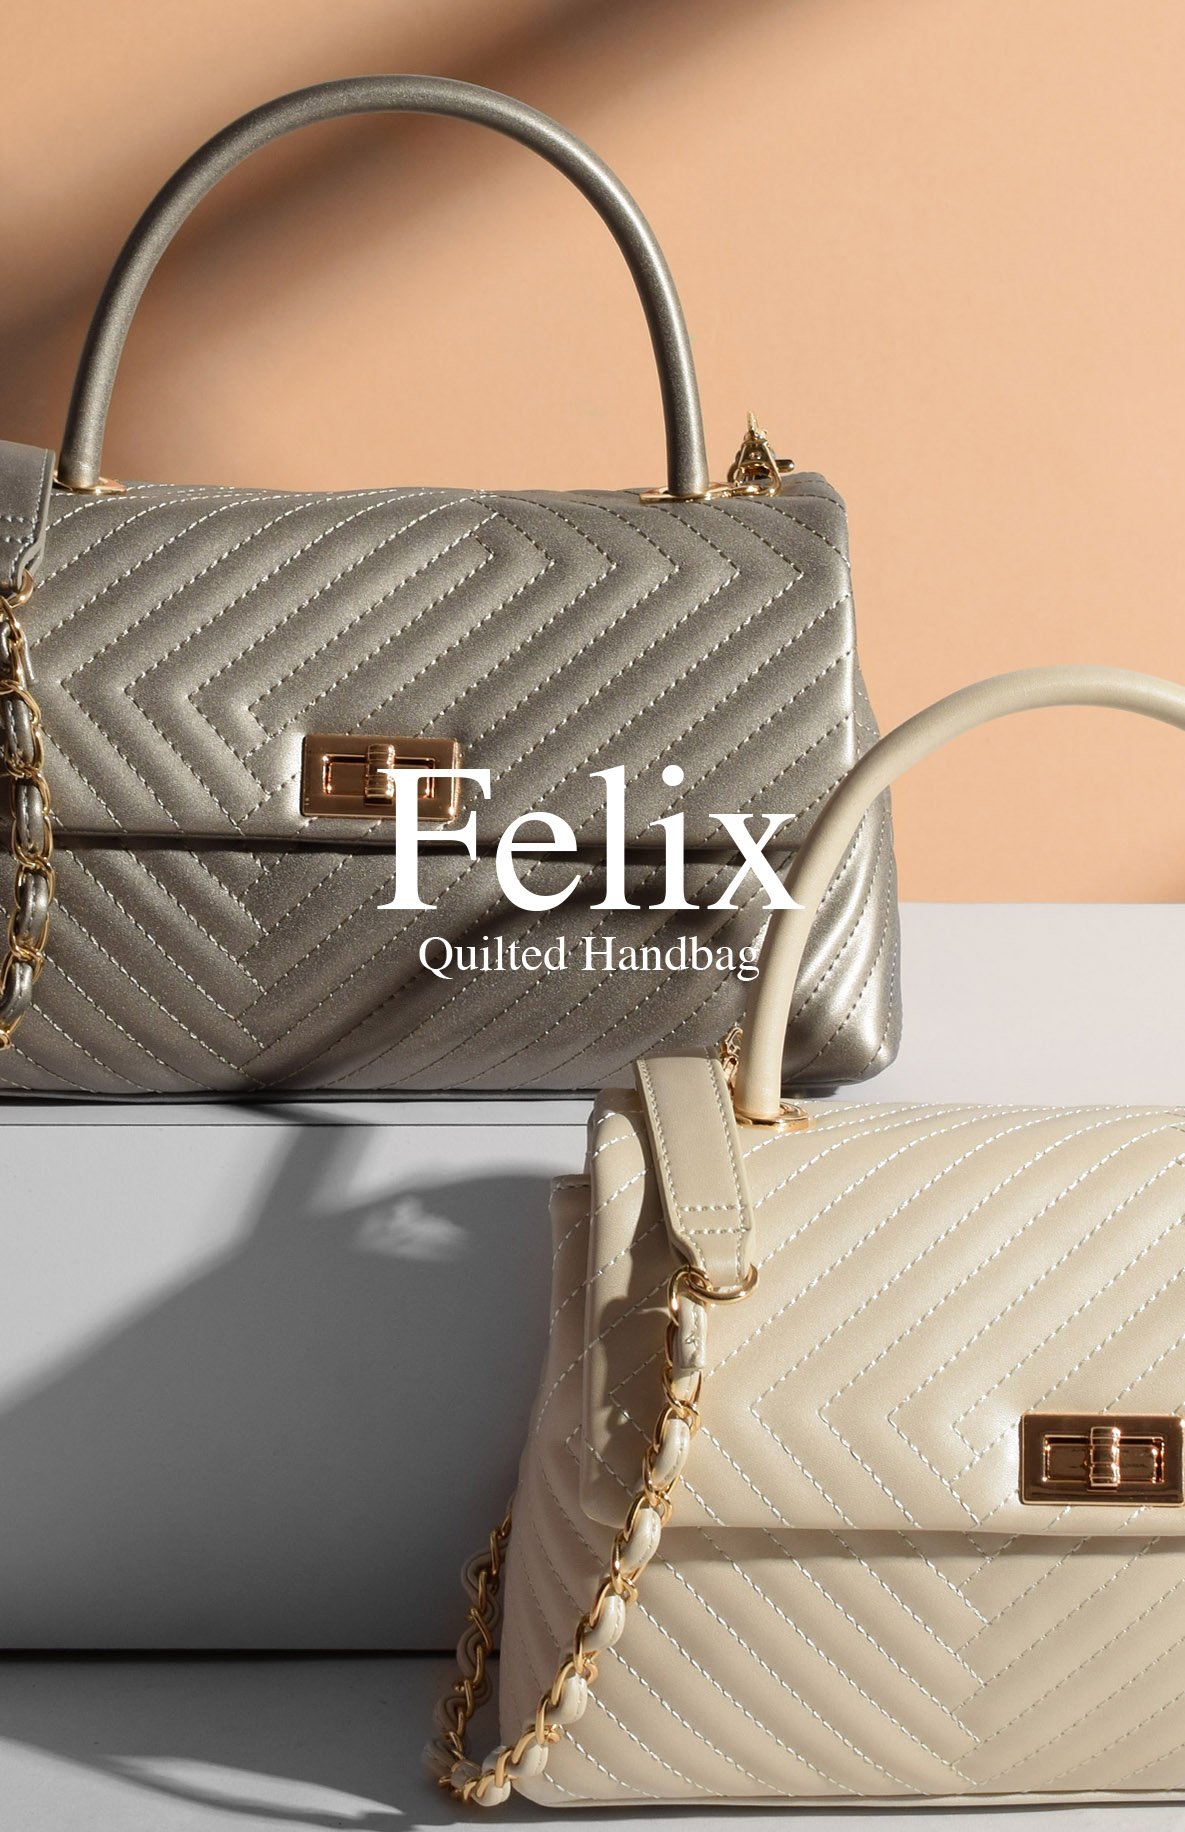 Christy Ng: NEW IN - Felix is Back in New Shades!